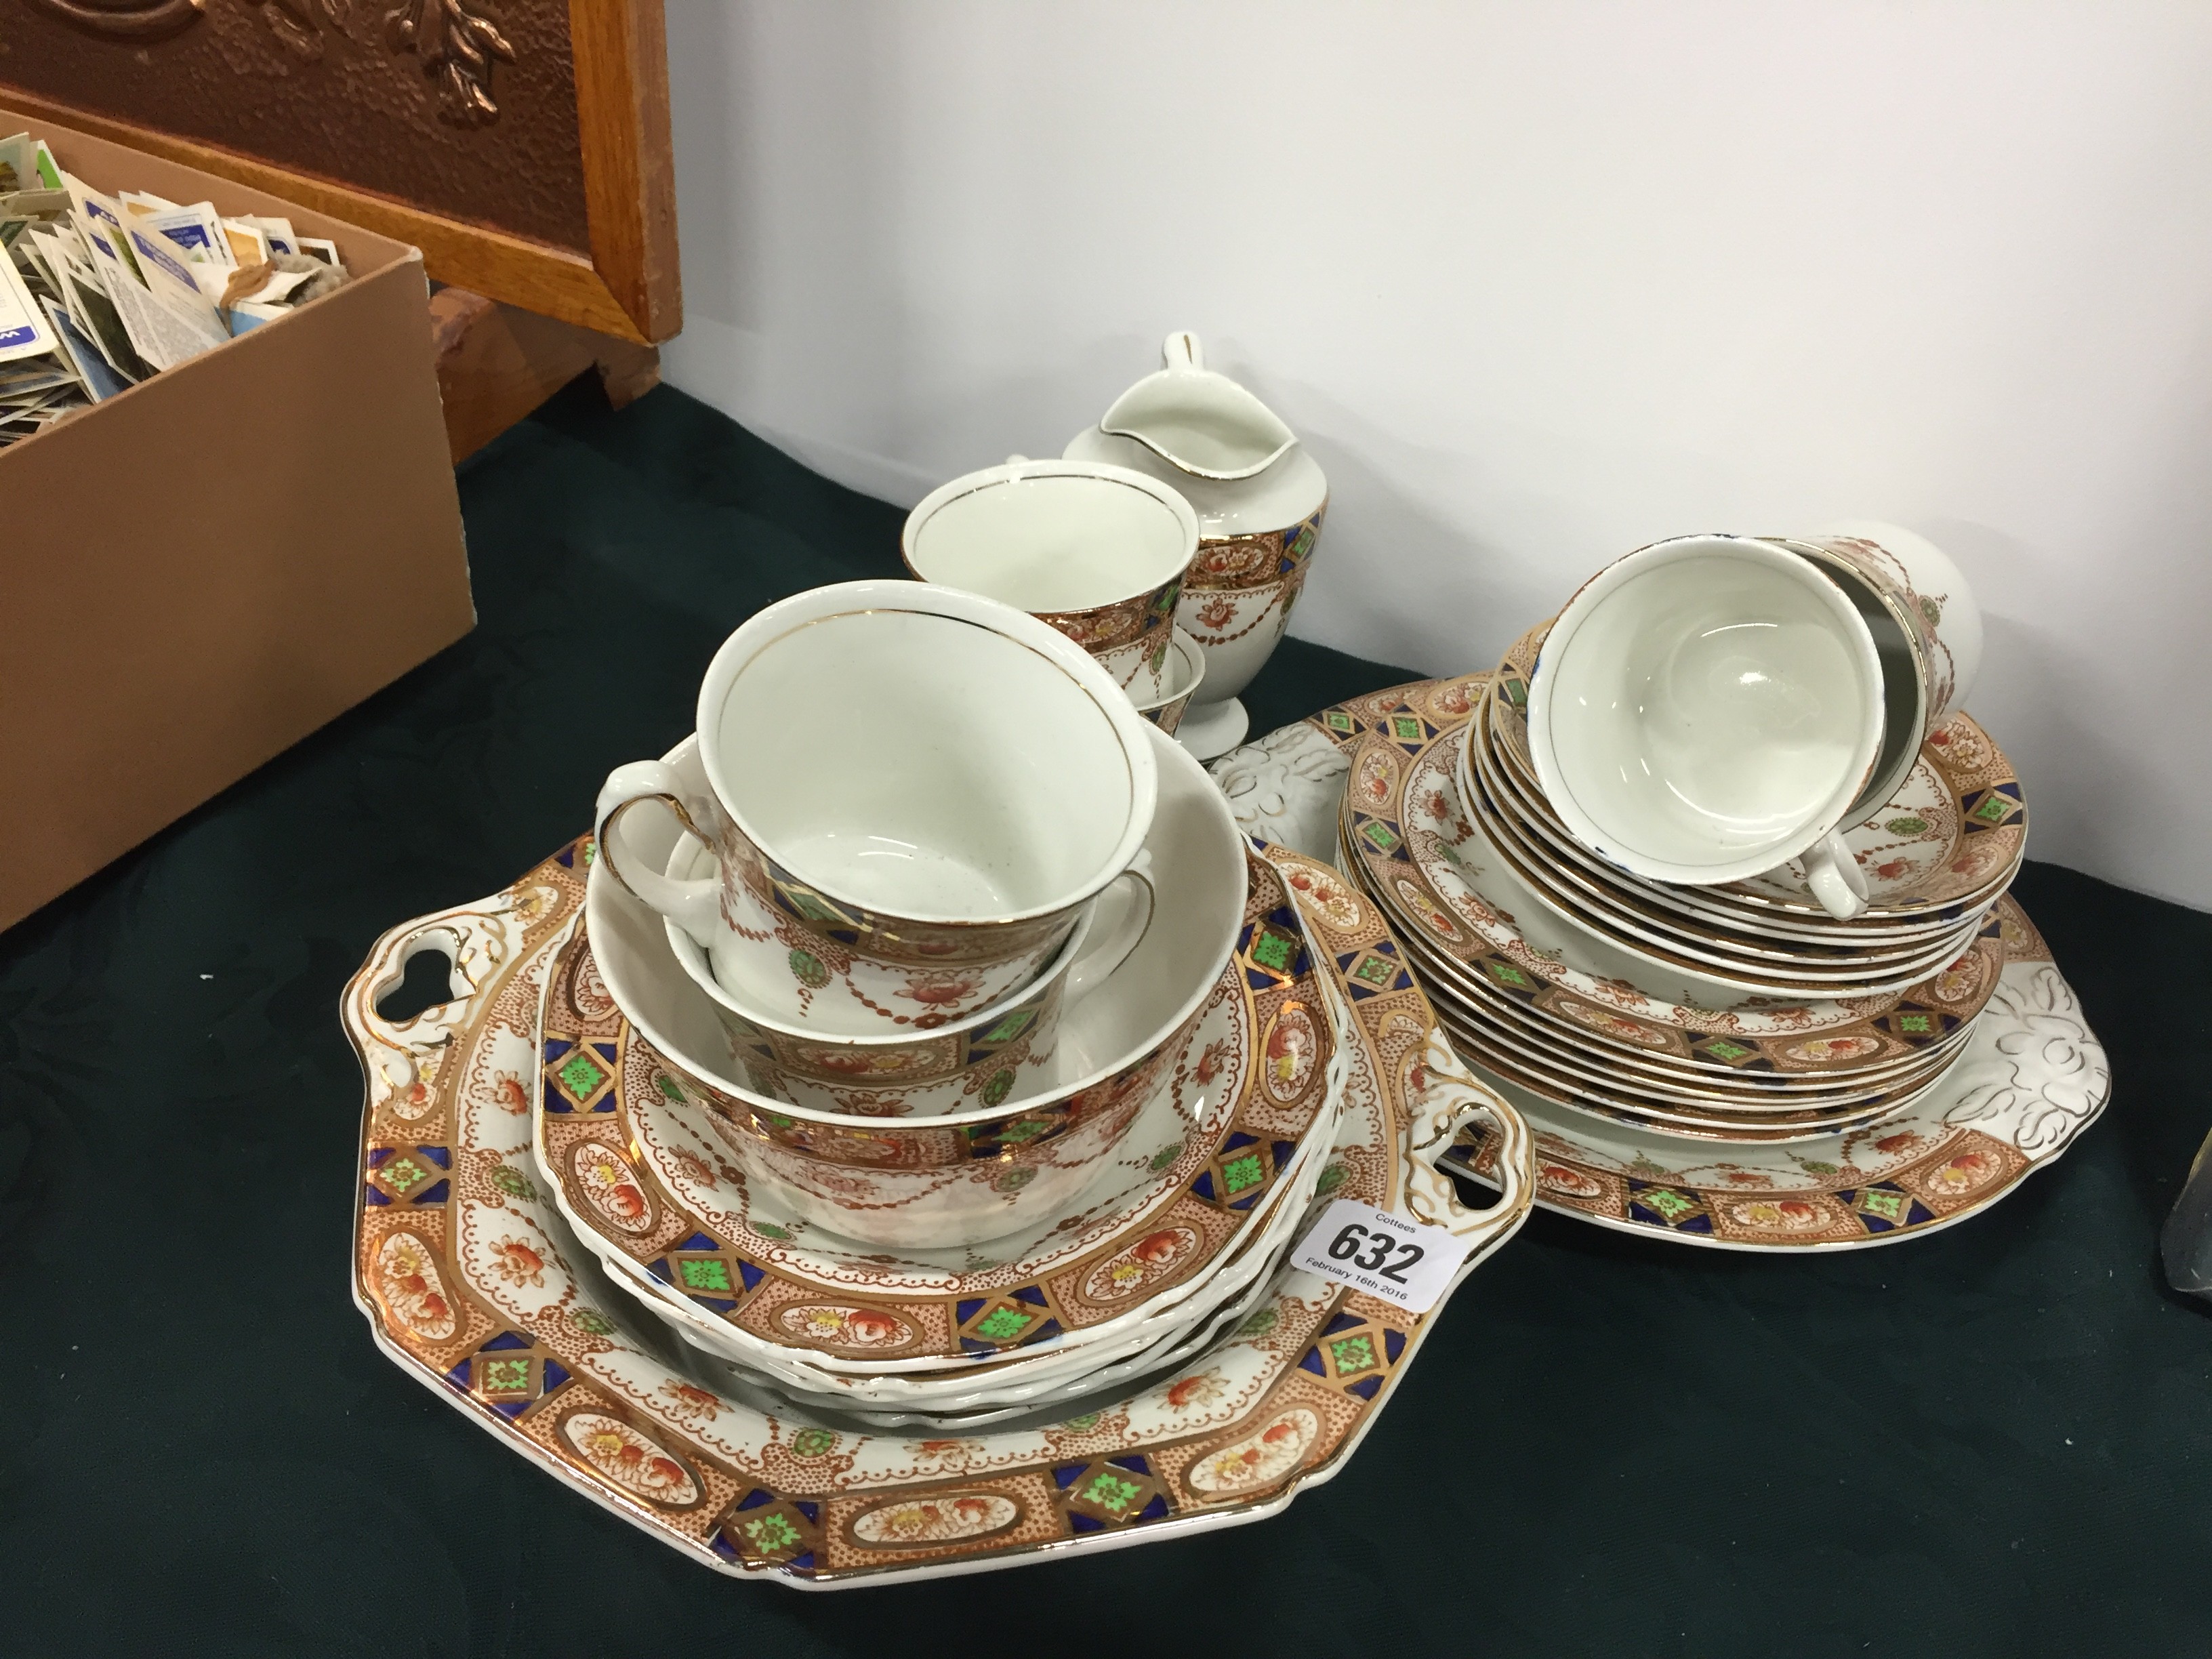 The residue of an early 20th century china teaset decorated in an Imari pattern.